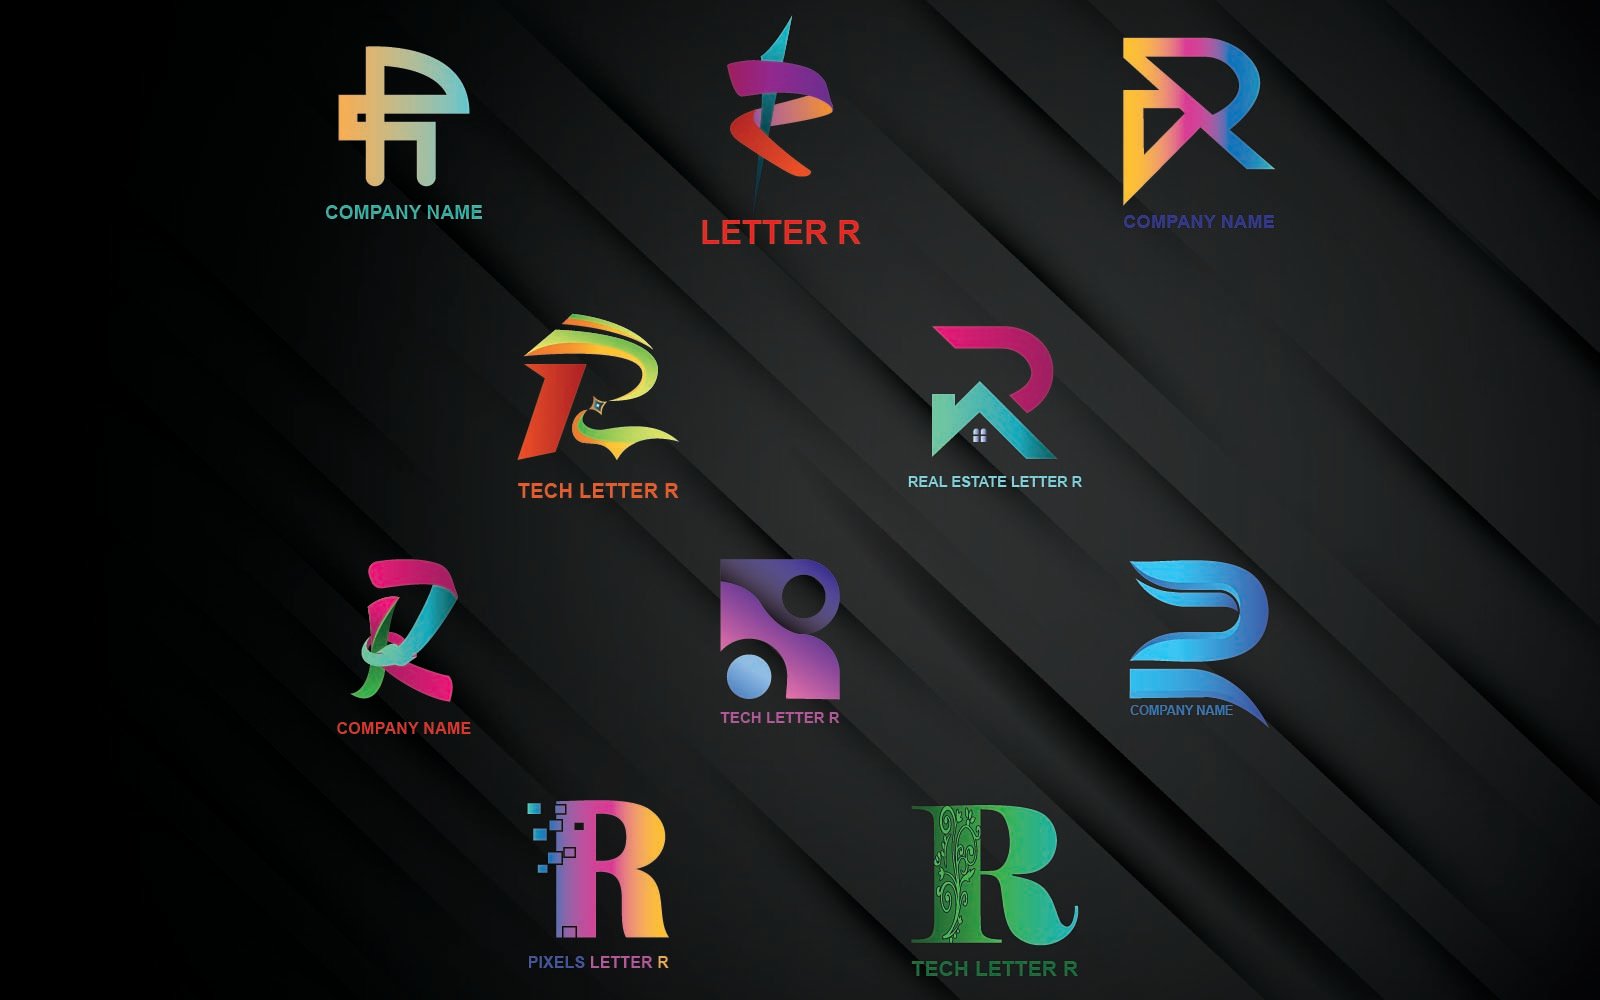 Letter R Logo Template For All Companies And Brands